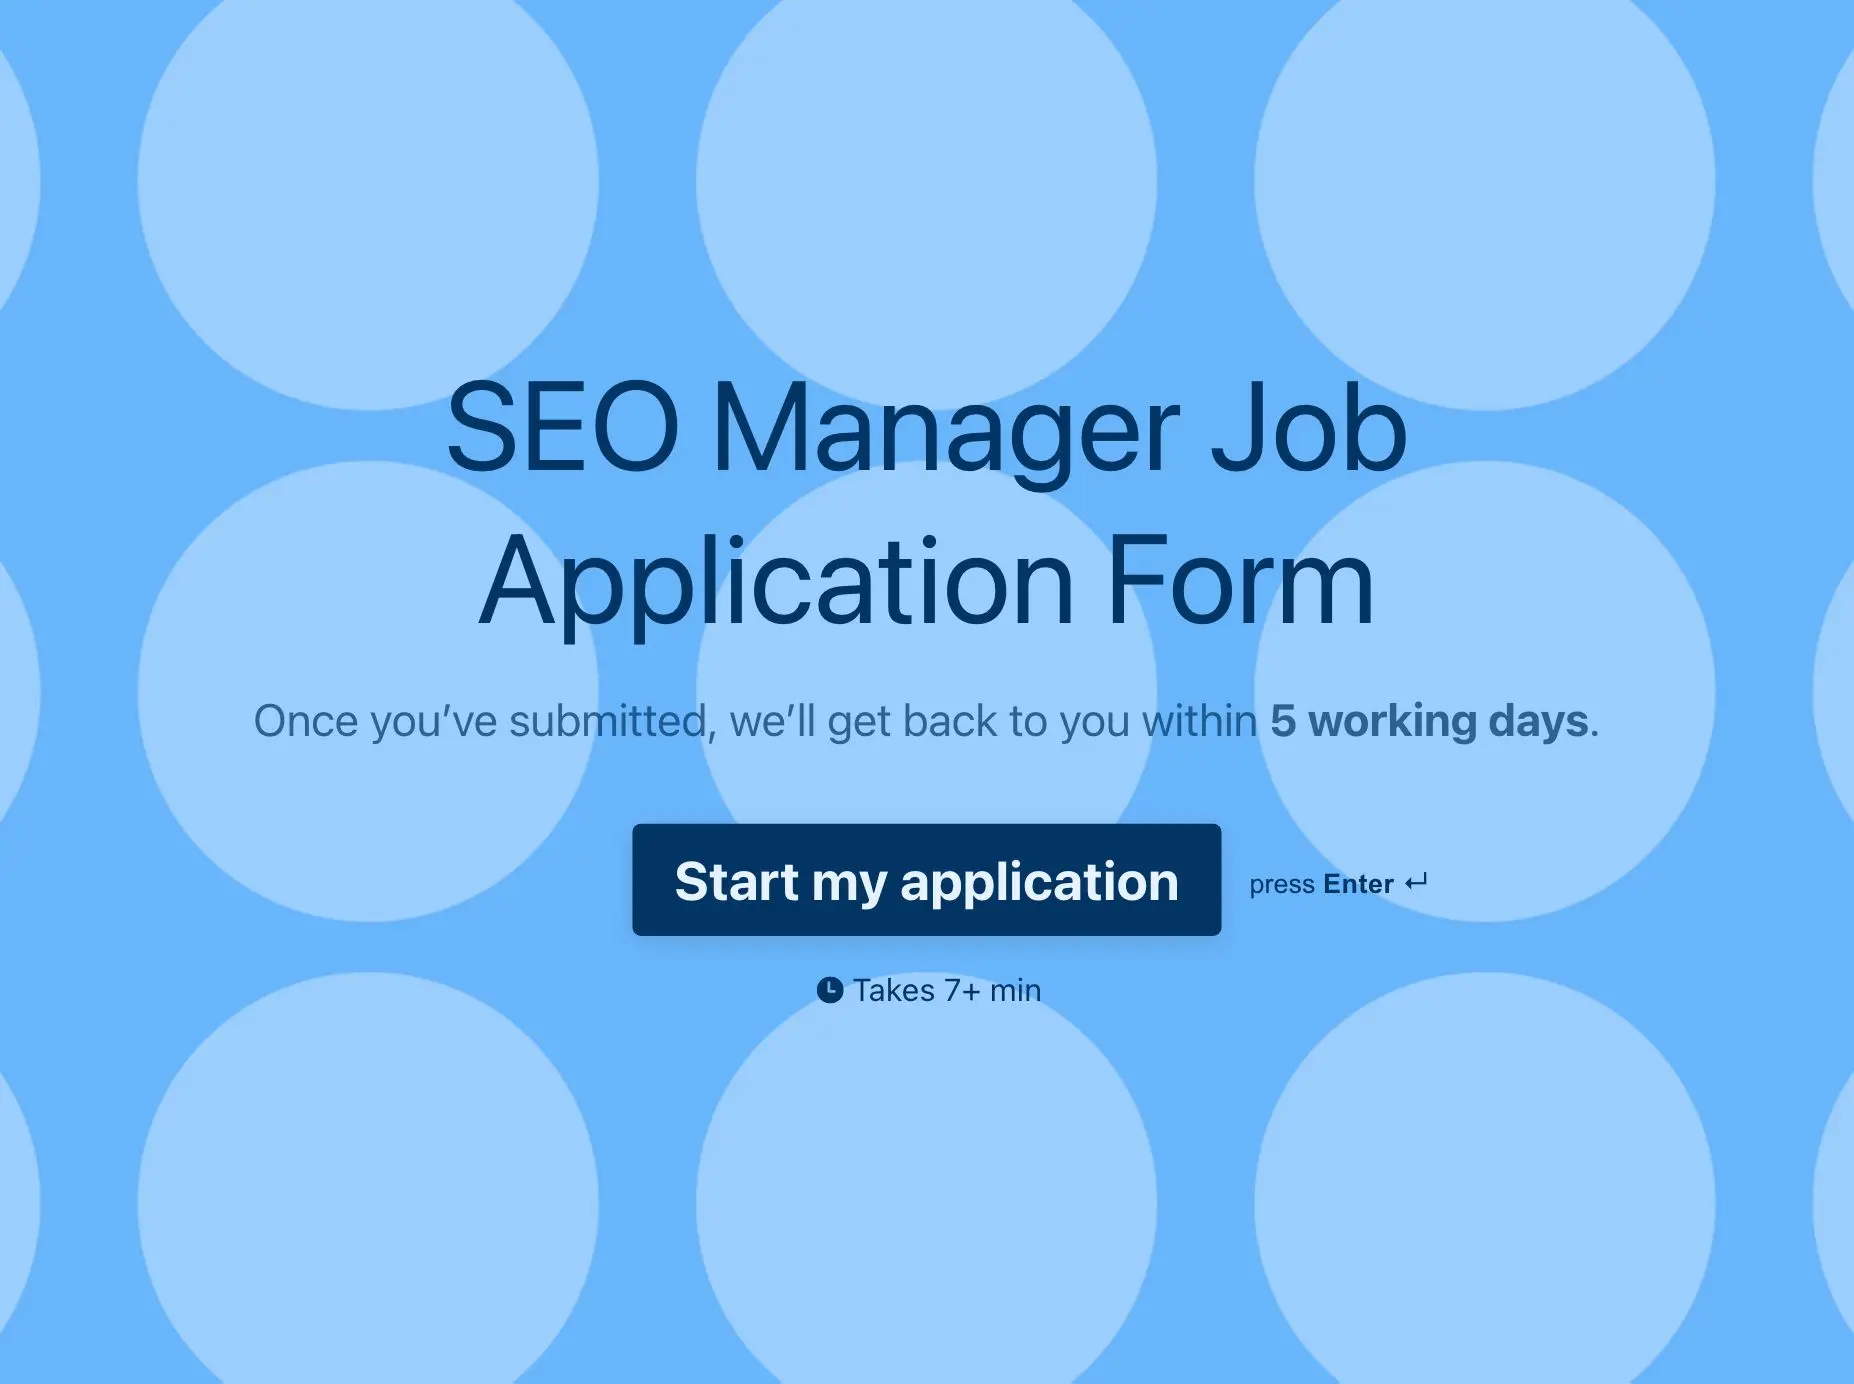 SEO Manager Job Application Form Template Hero